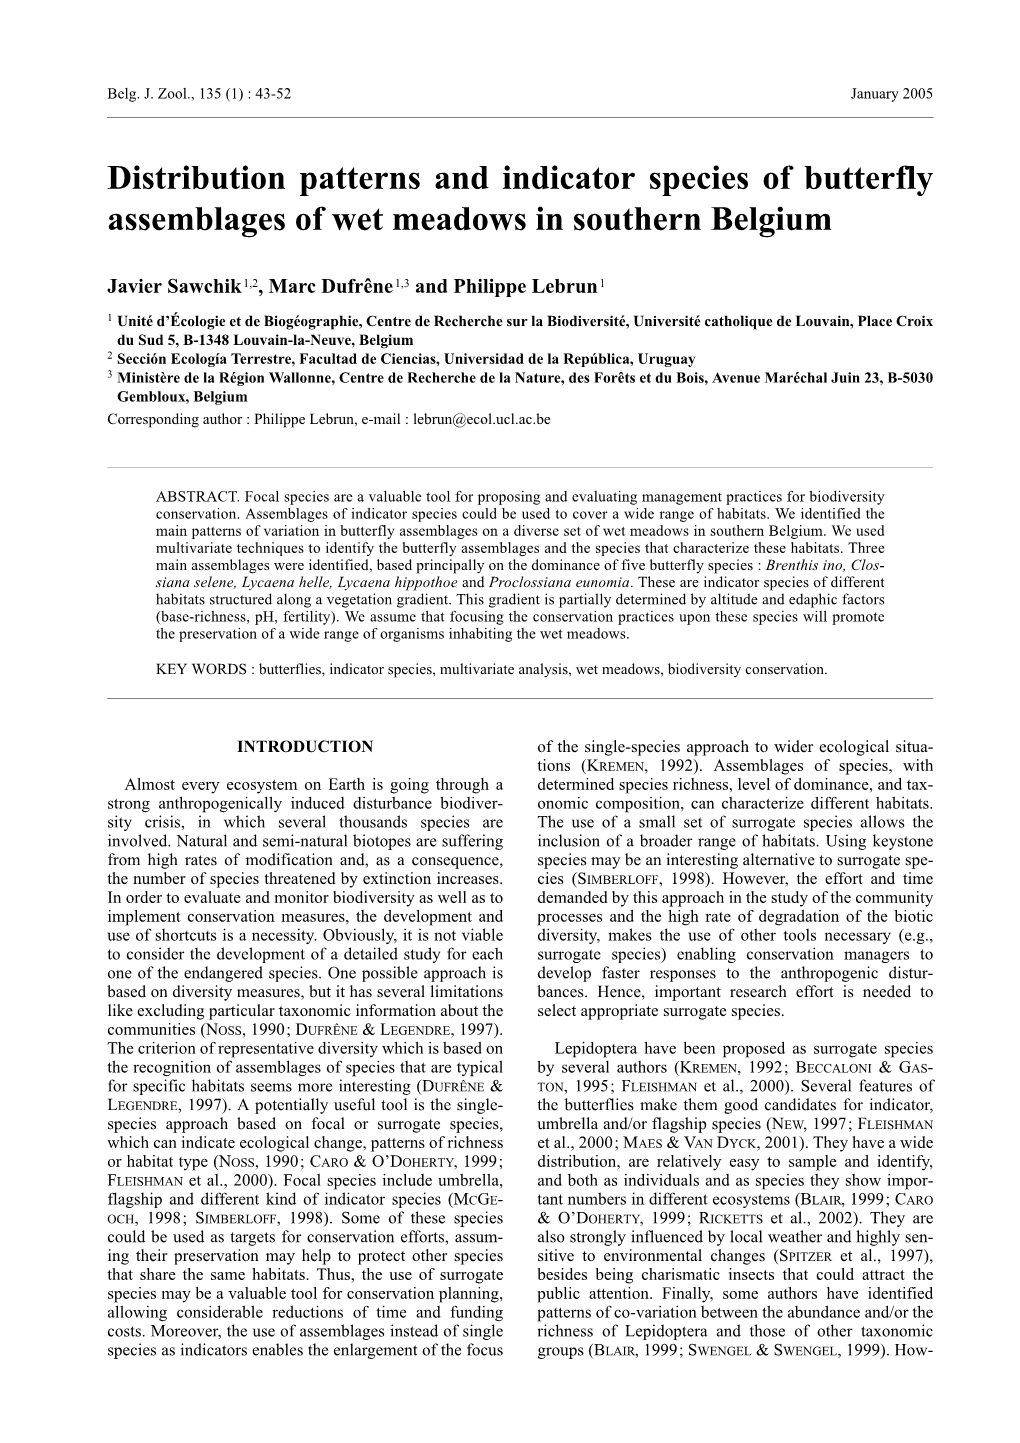 Distribution Patterns and Indicator Species of Butterfly Assemblages of Wet Meadows in Southern Belgium